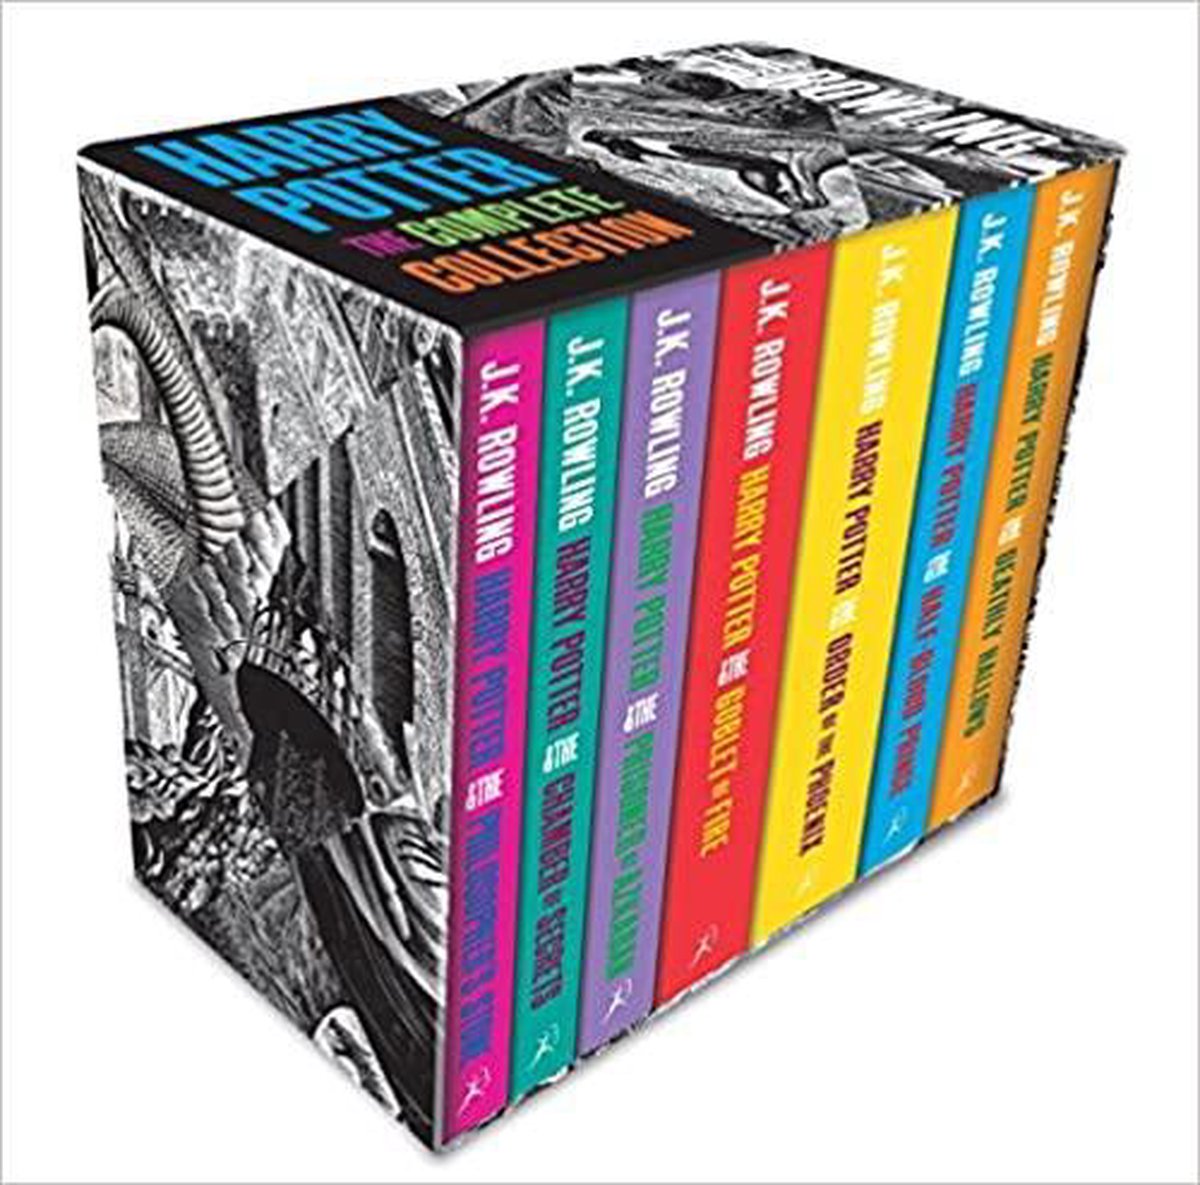 Harry Potter Boxed Set: The Complete Collection (Adult Paperback) - J.K. Rowling